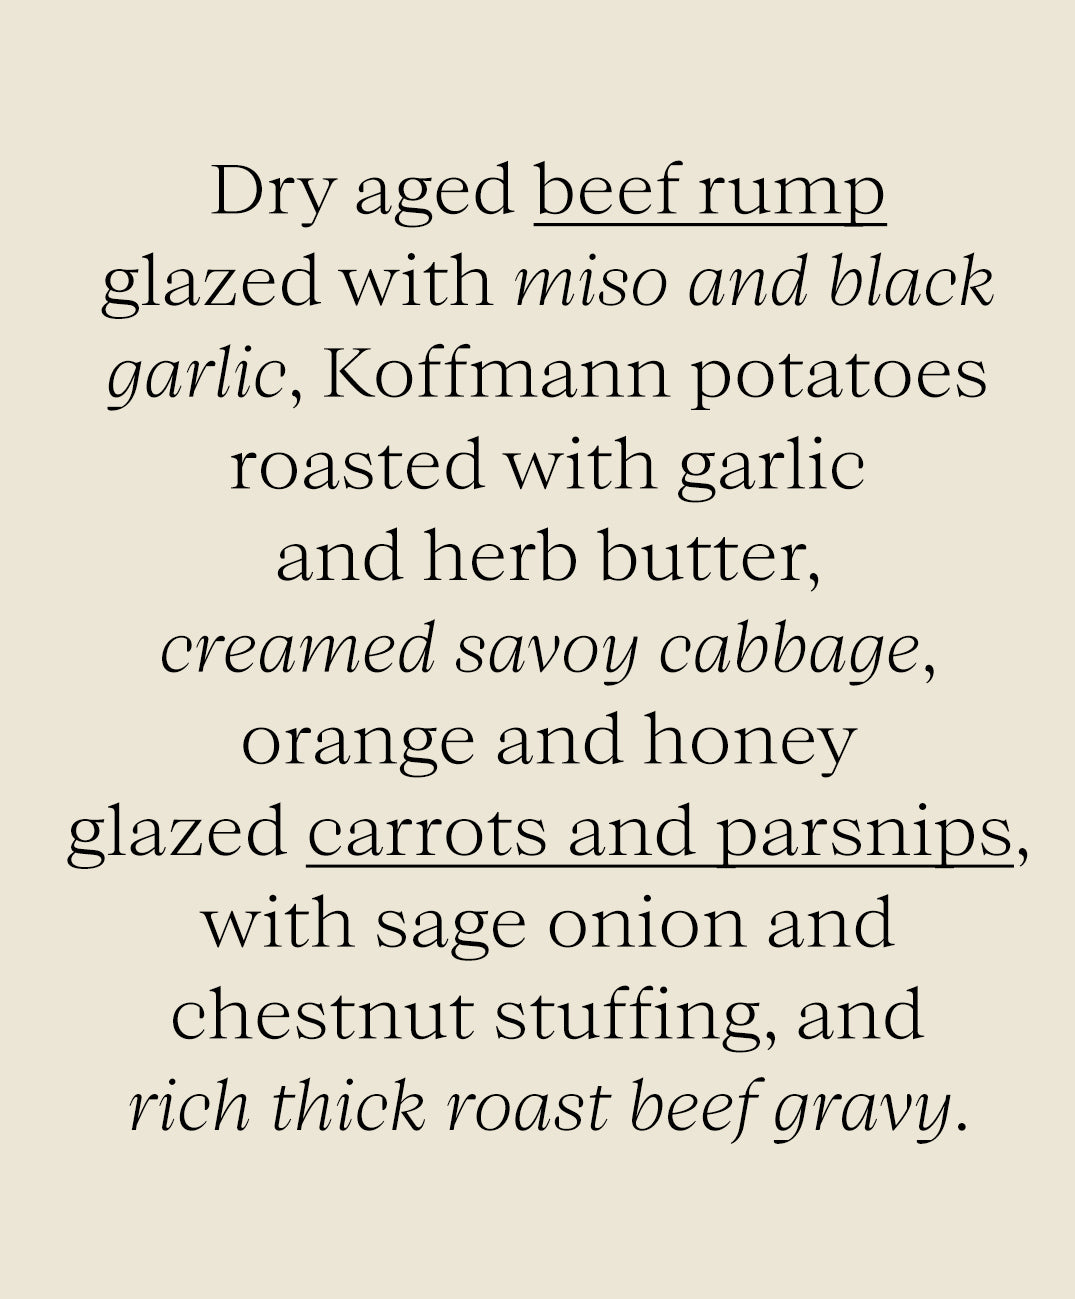 The Roast Dinner Collection - Black Garlic & Miso Roasted Beef